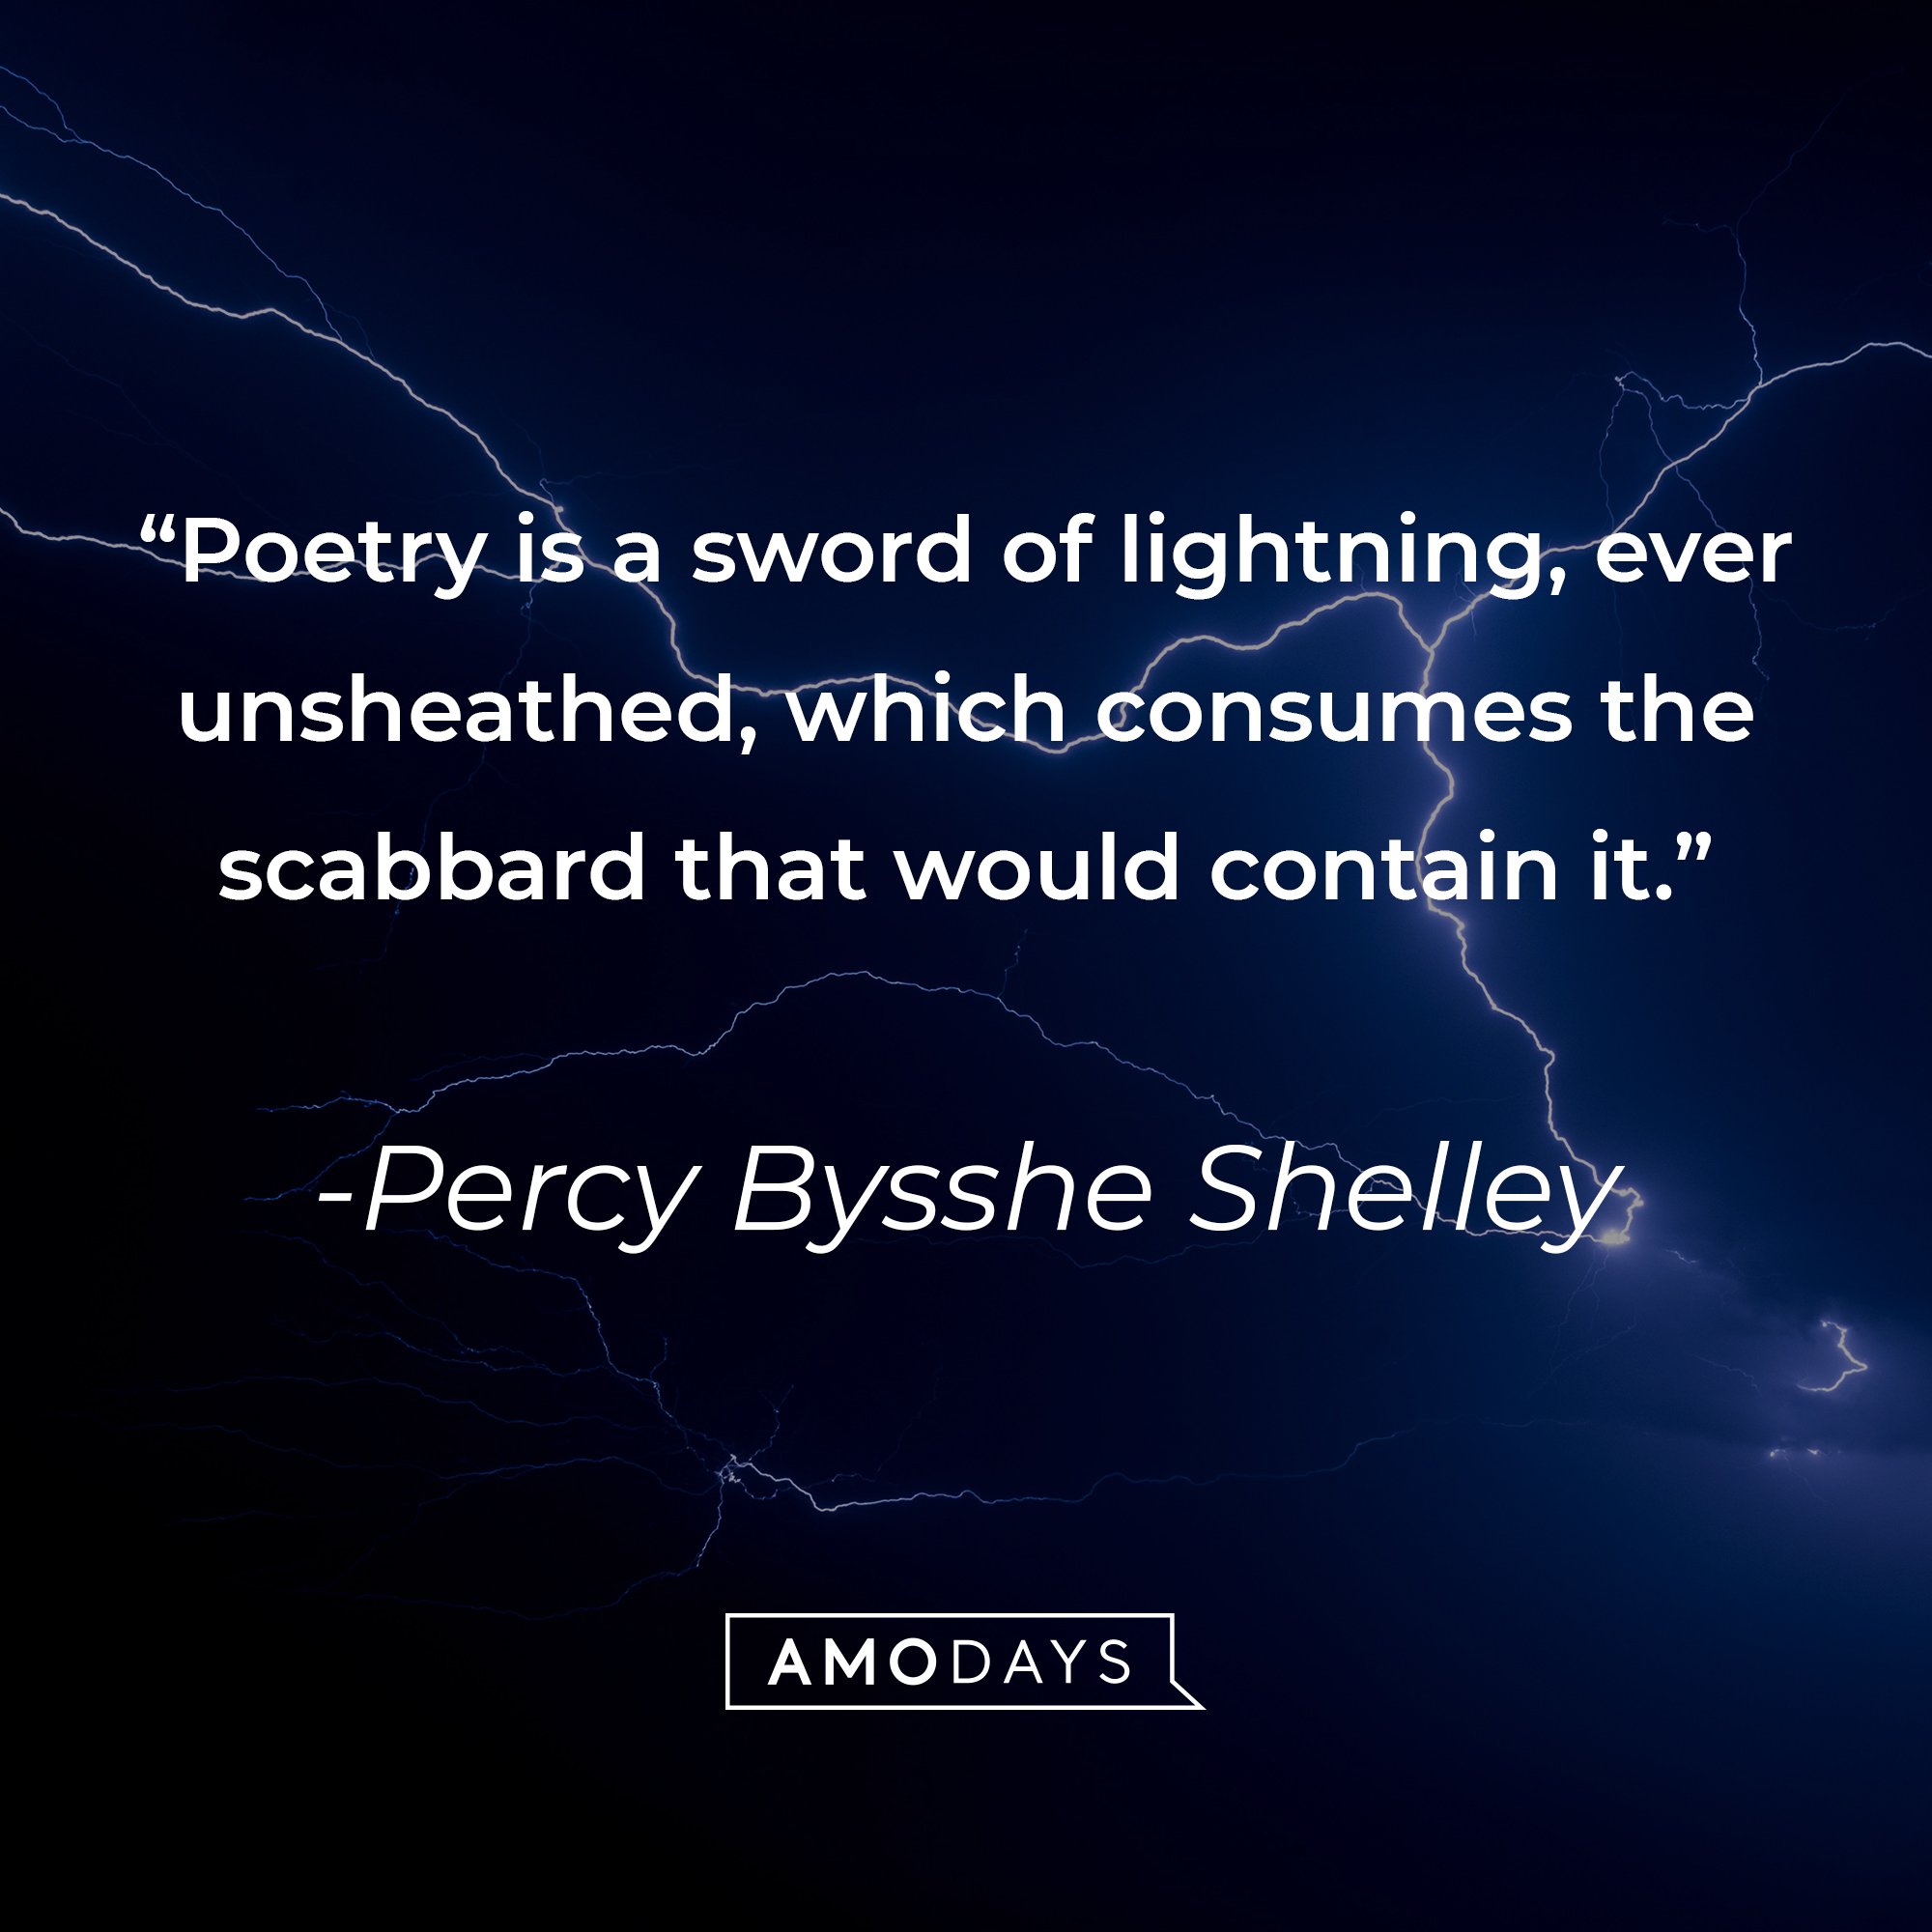 Percy Bysshe Shelley’s quote: "Poetry is a sword of lightning, ever unsheathed, which consumes the scabbard that would contain it." | Image: AmoDays   